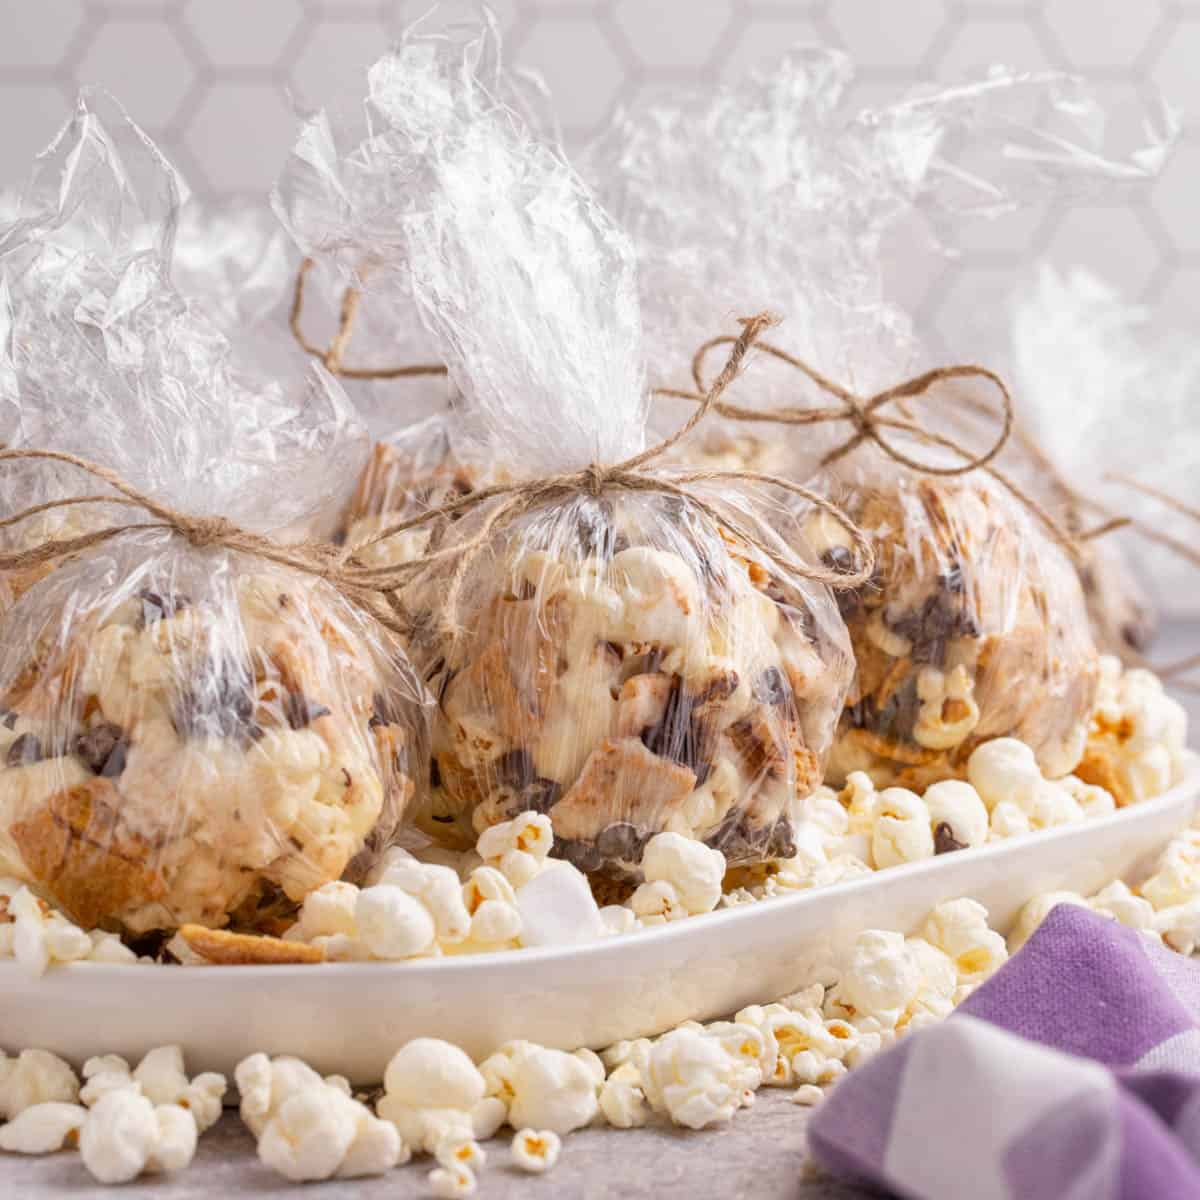 S'mores popcorn balls wrapped in cellophane.